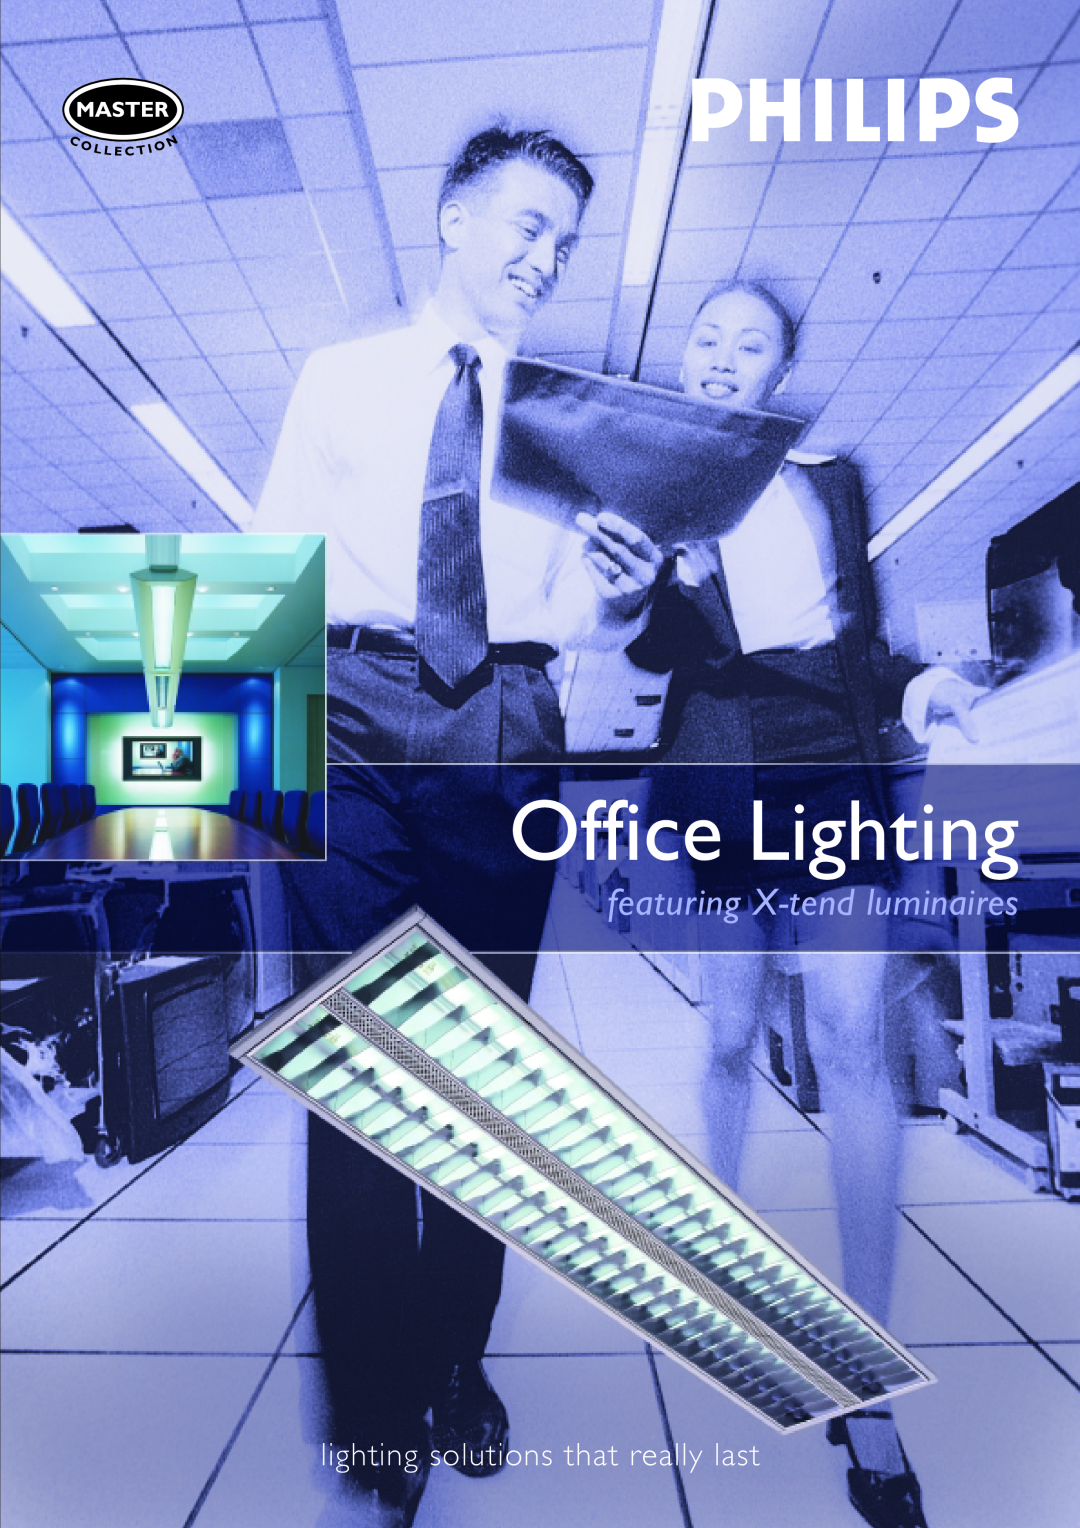 Philips Office Lighting manual featuring X-tendluminaires, lighting solutions that really last 